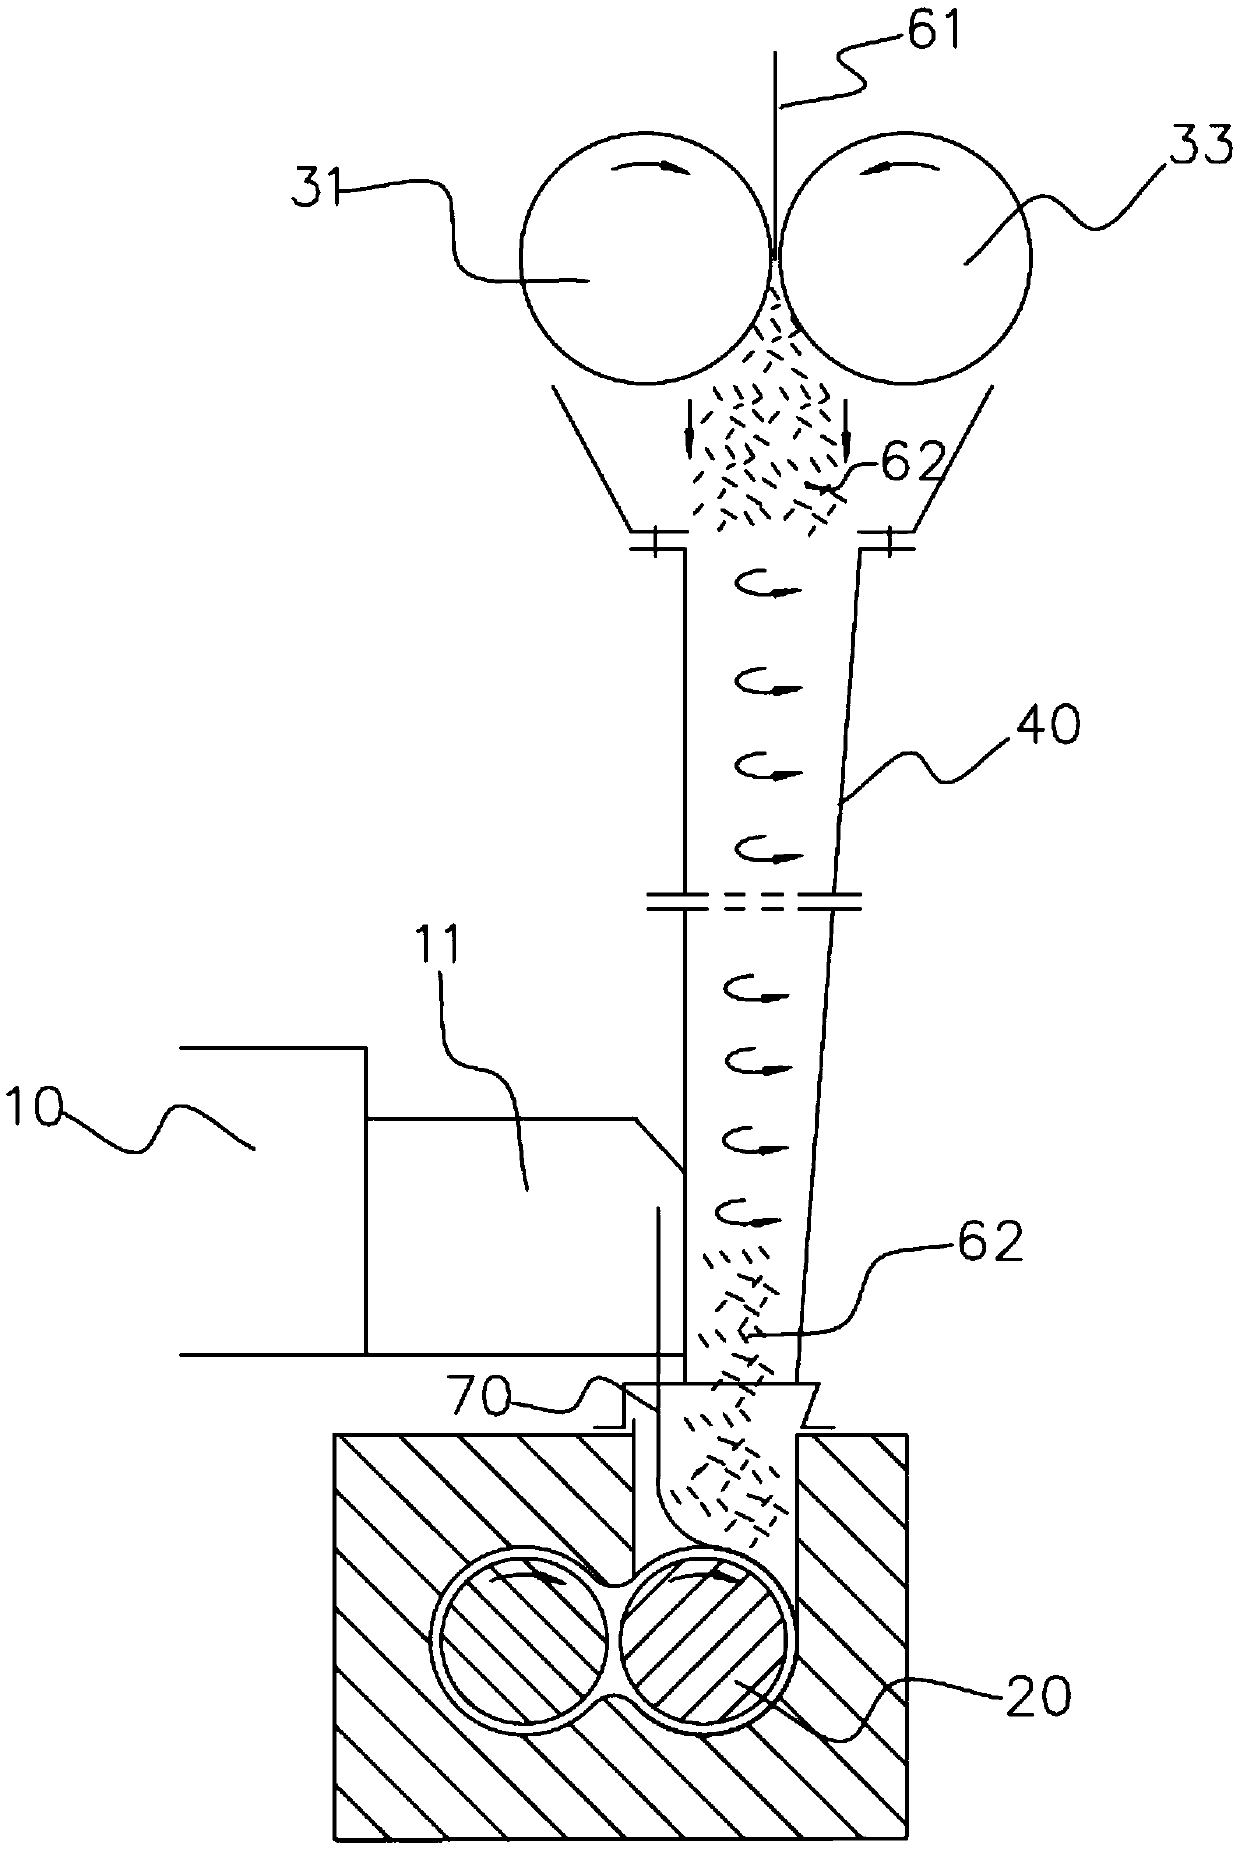 Fiber cutting device and fiber reinforced composite material mixing equipment